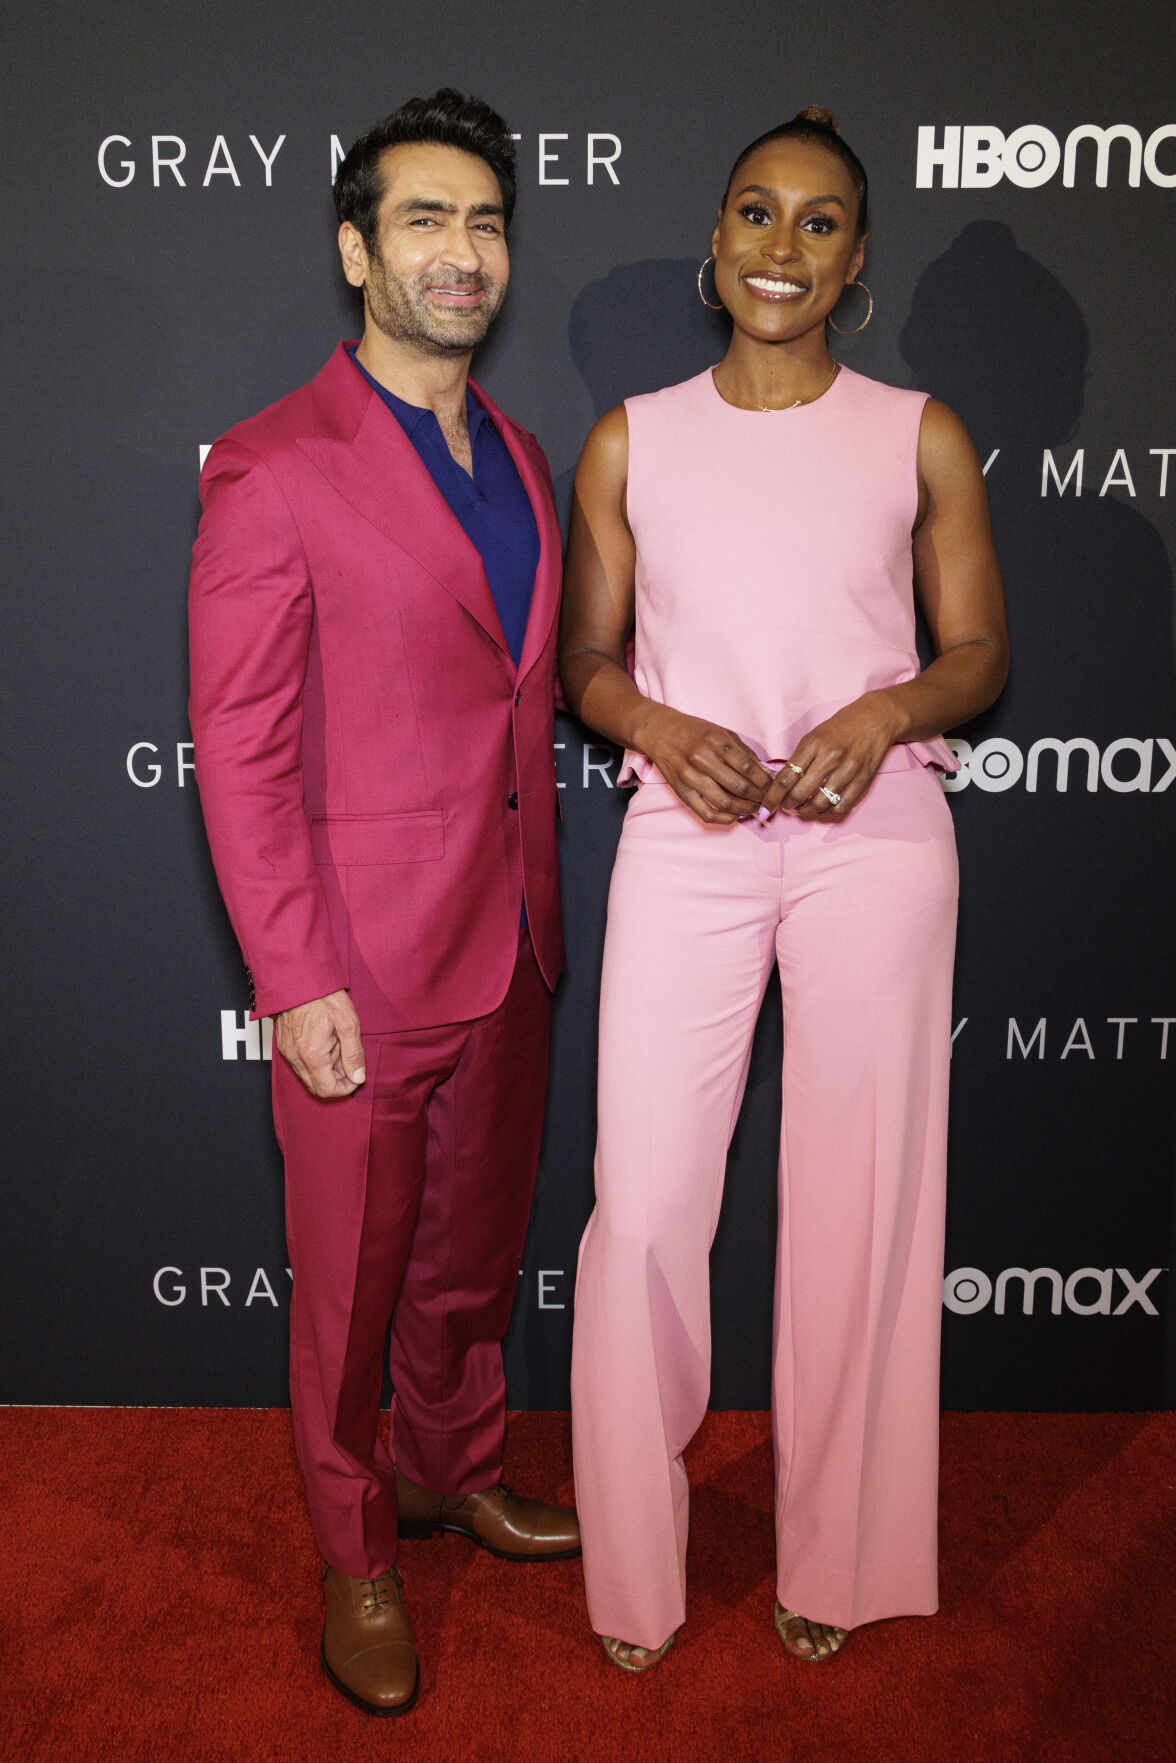 Kumail Nanjiani and Issa Rae at a special screening of "Gray Matter," part of the series "Project Greenlight," on Tuesday, Feb. 28, 2023, at The Fairmont Miramar in Santa Monica, Calif.